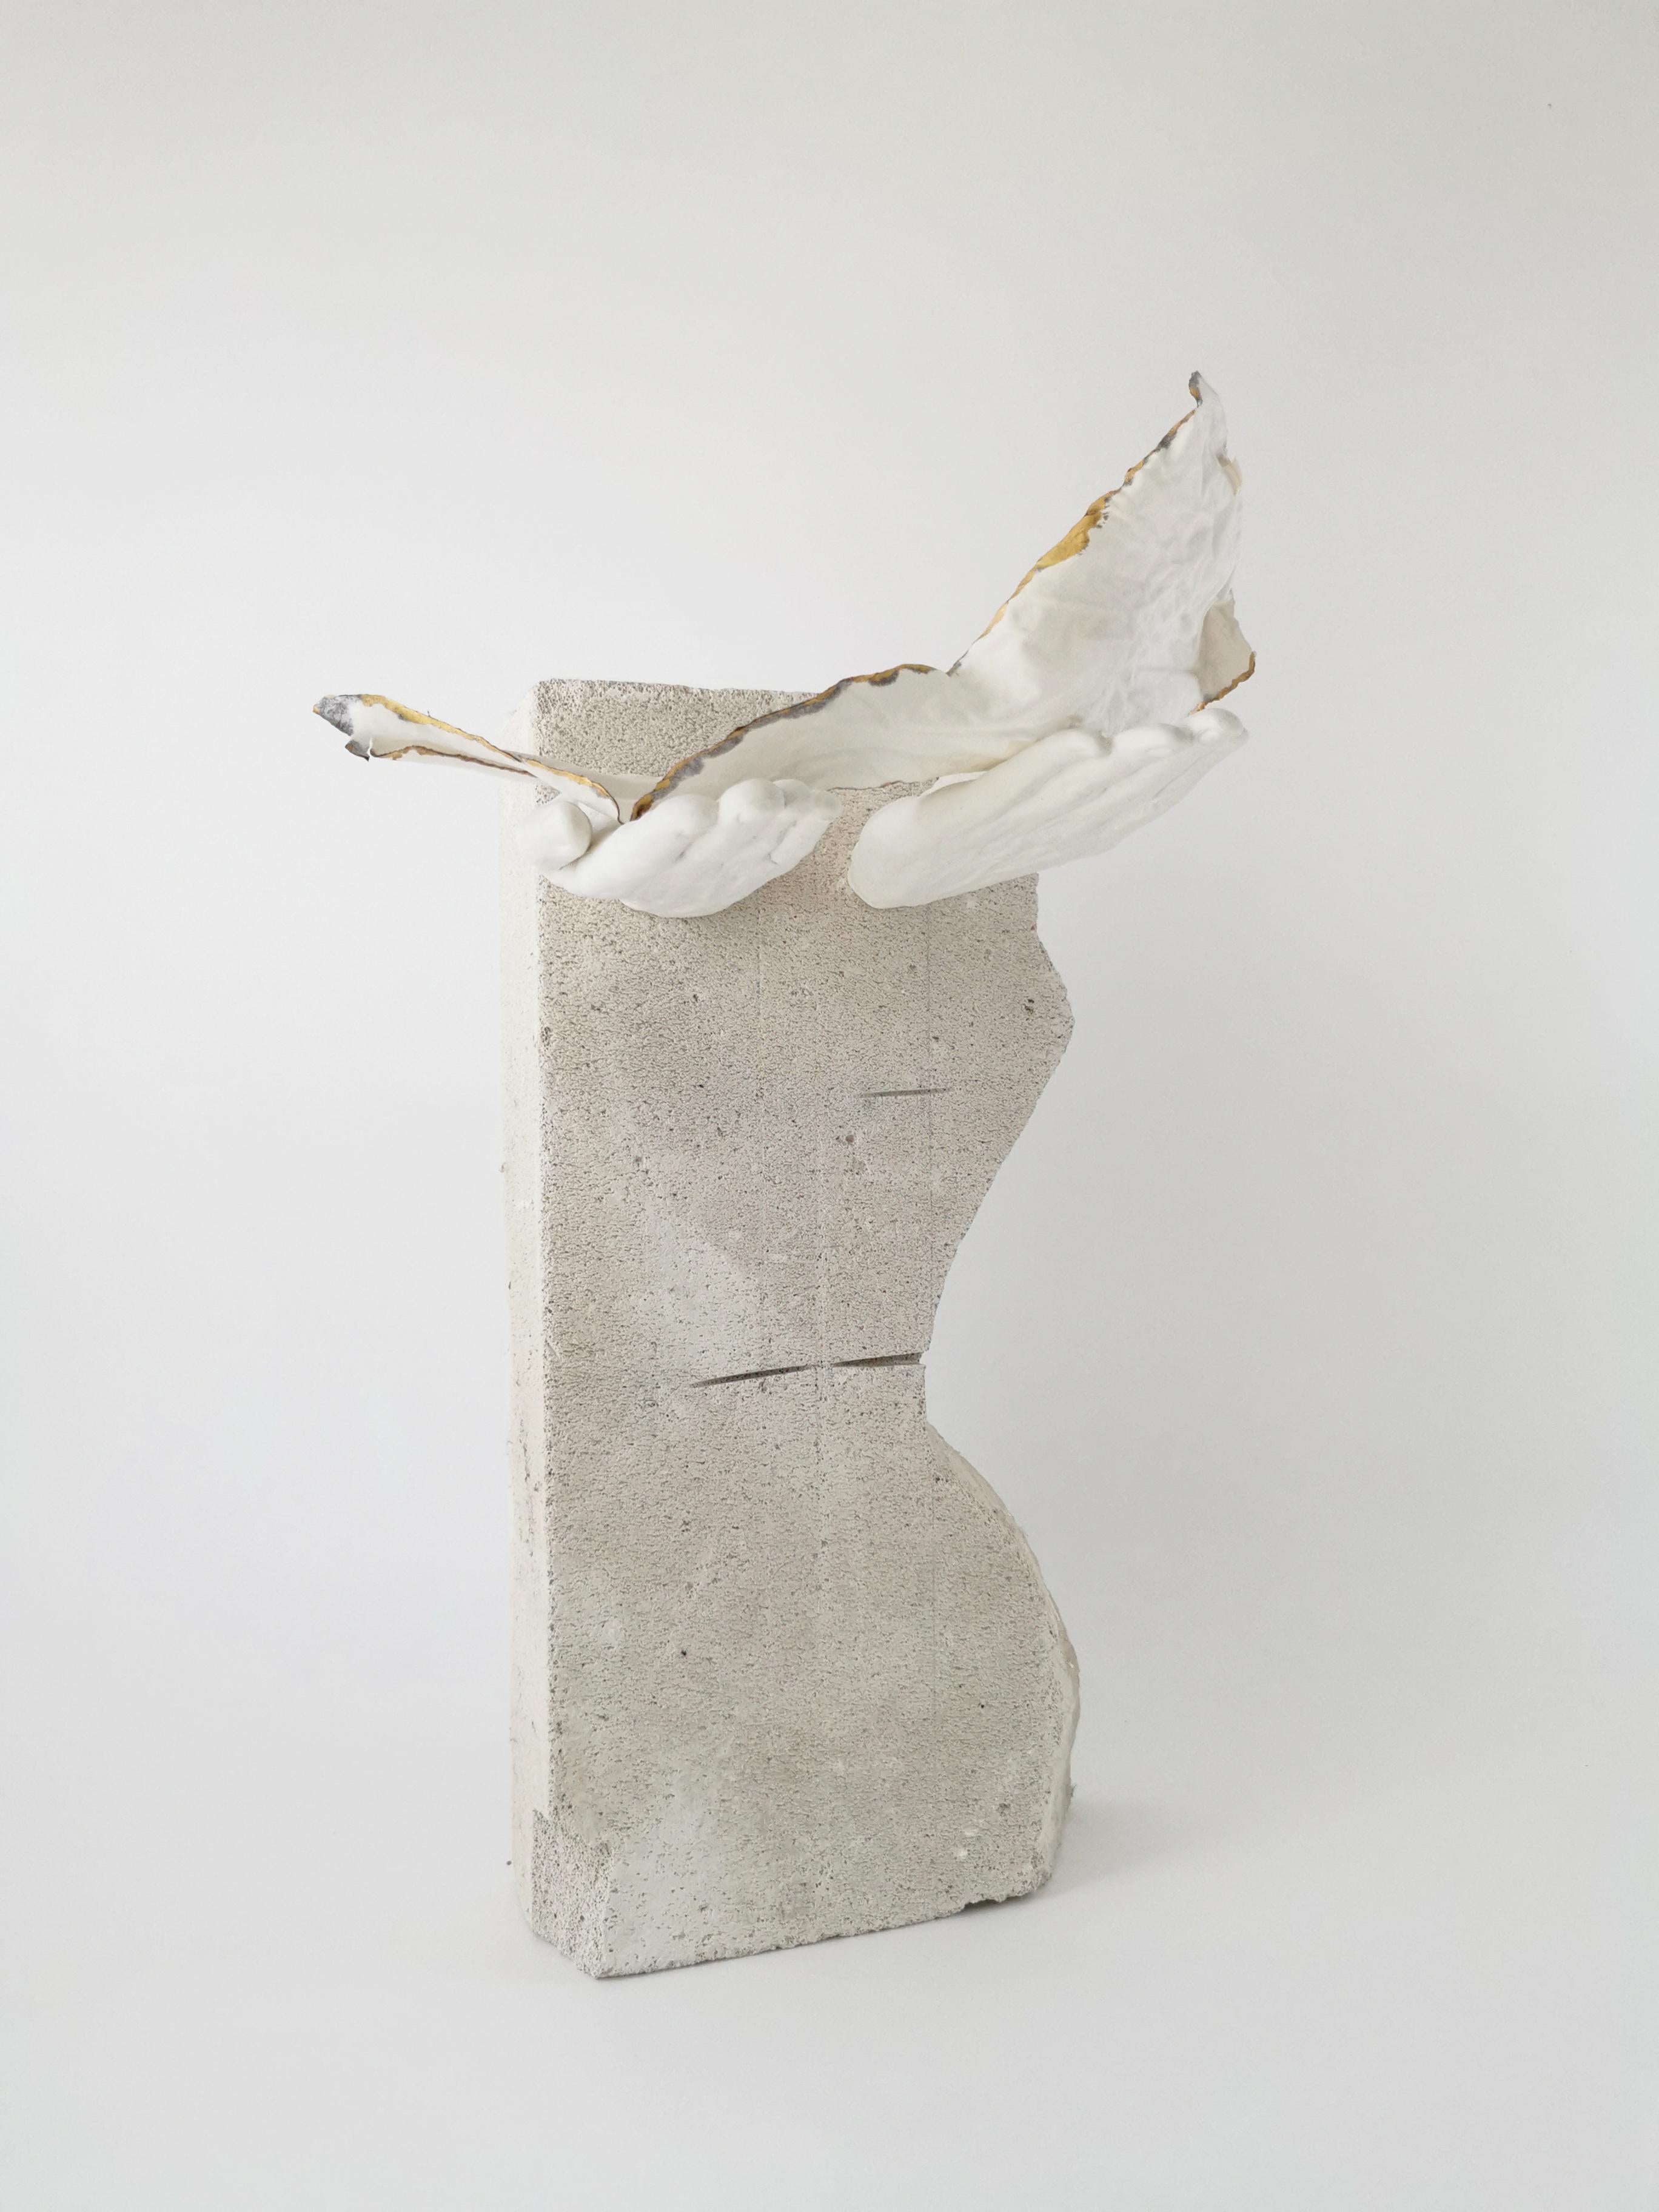 Offering II Sculpture by Dora Stanczel
One of a Kind.
Dimensions: D 15 x W 50 x H 37 cm.
Materials: Porcelain, metal, support tufa and gold.

I create bespoke and luxurious porcelain pieces with a careful aesthetic. Beyond the technical mastery of